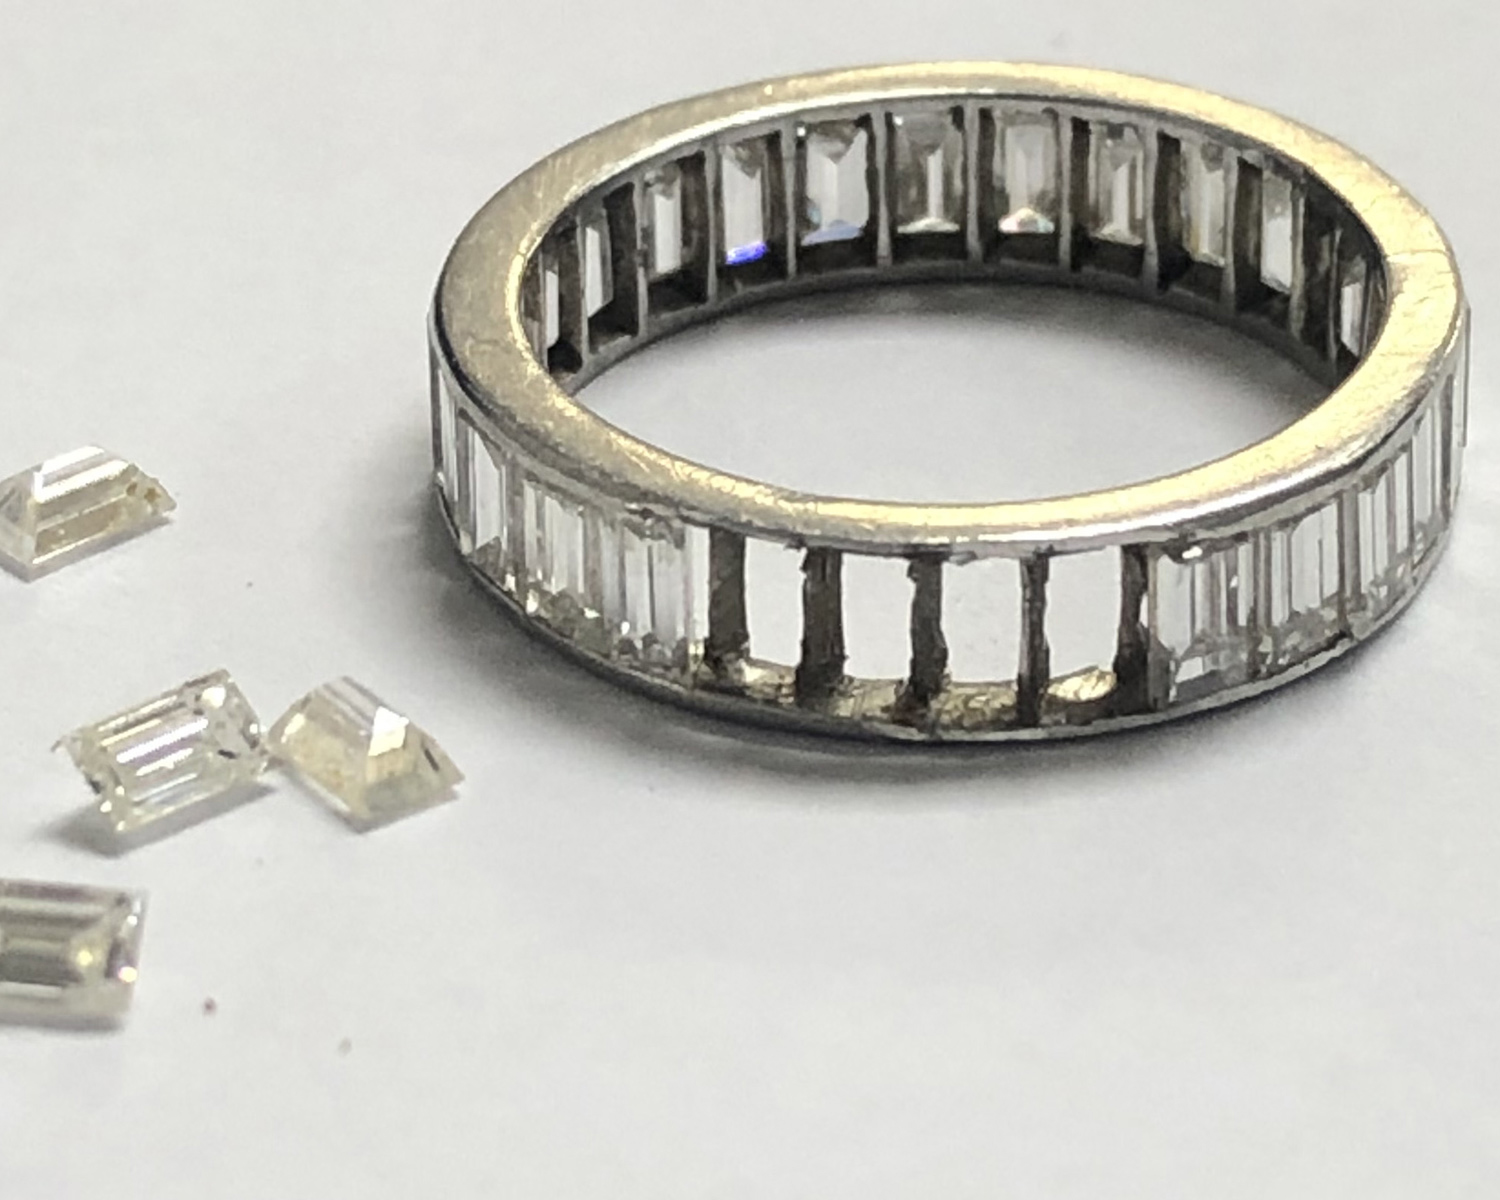 Old damaged ring being redesigned to a modern chunky version